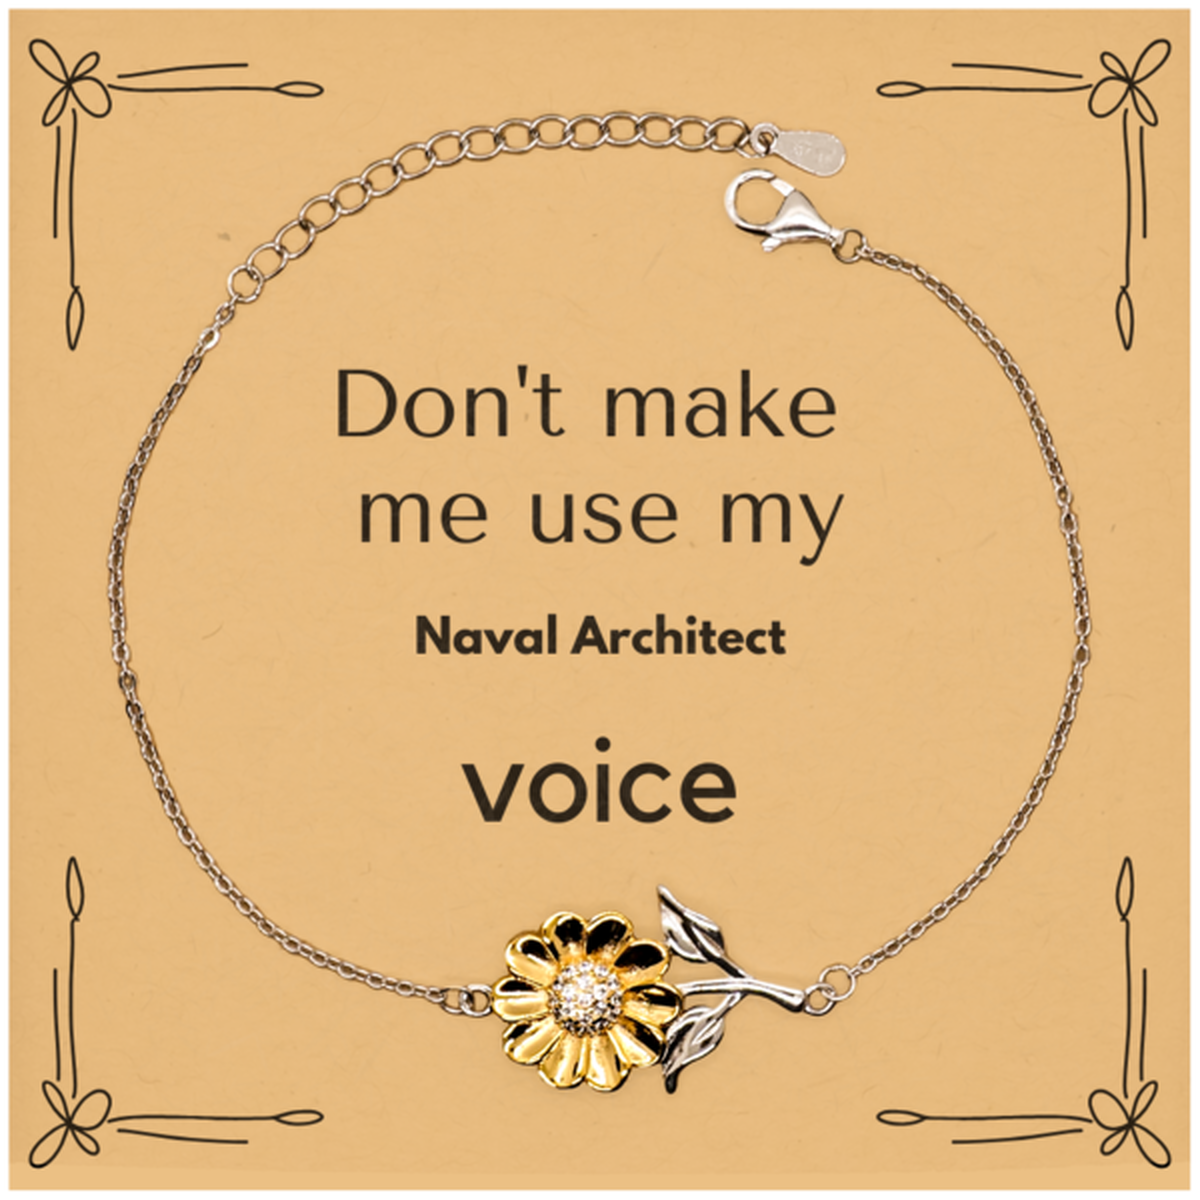 Don't make me use my Naval Architect voice, Sarcasm Naval Architect Card Gifts, Christmas Naval Architect Sunflower Bracelet Birthday Unique Gifts For Naval Architect Coworkers, Men, Women, Colleague, Friends